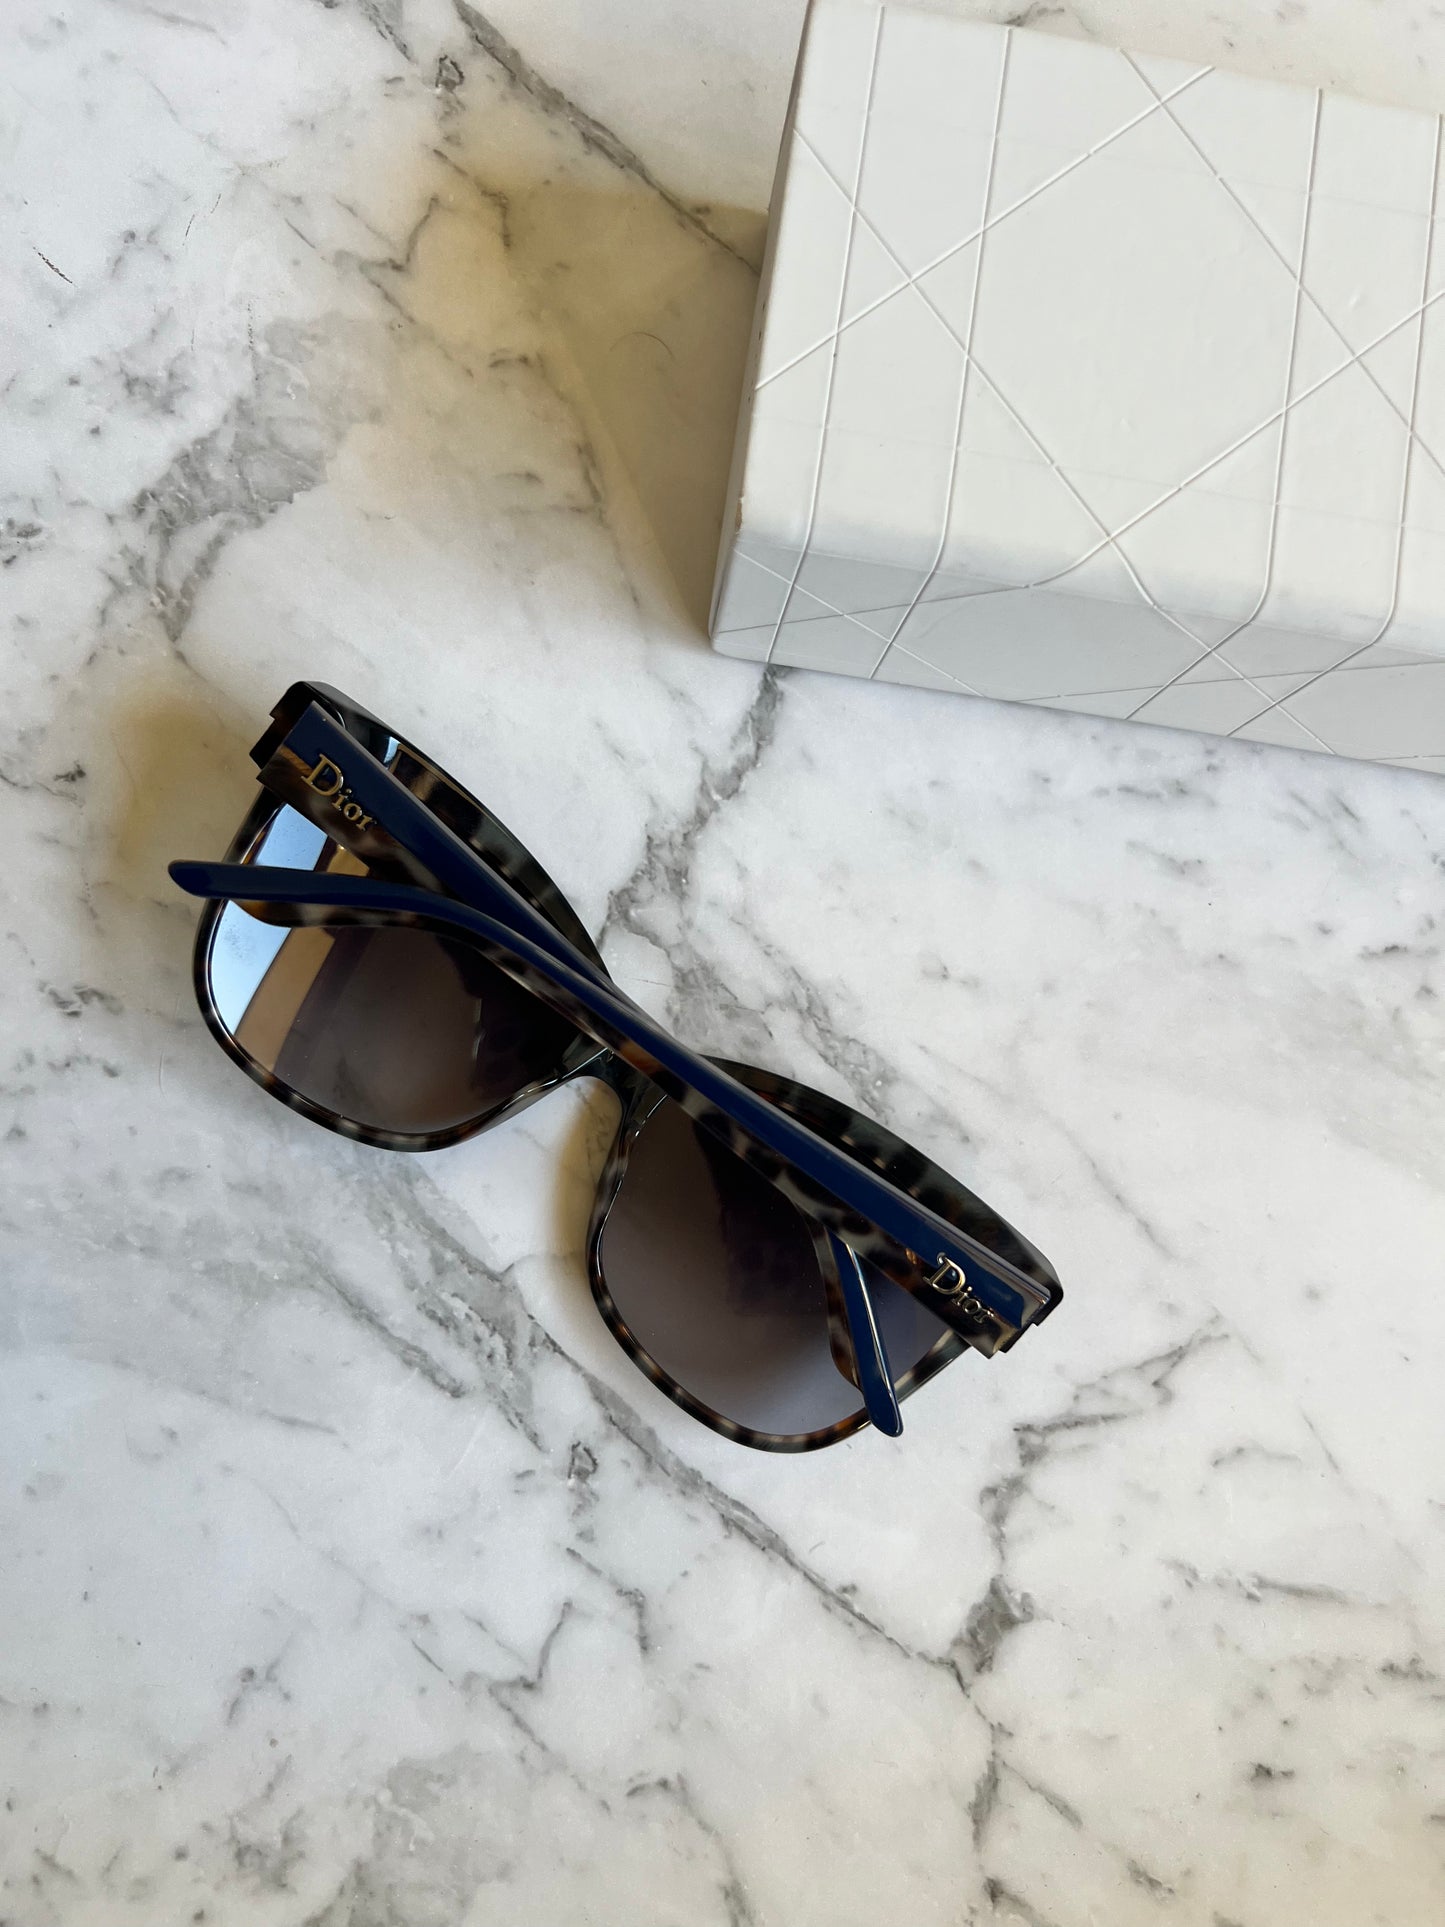 Authentic Christian Dior Sauvage Women's Navy Sunglasses